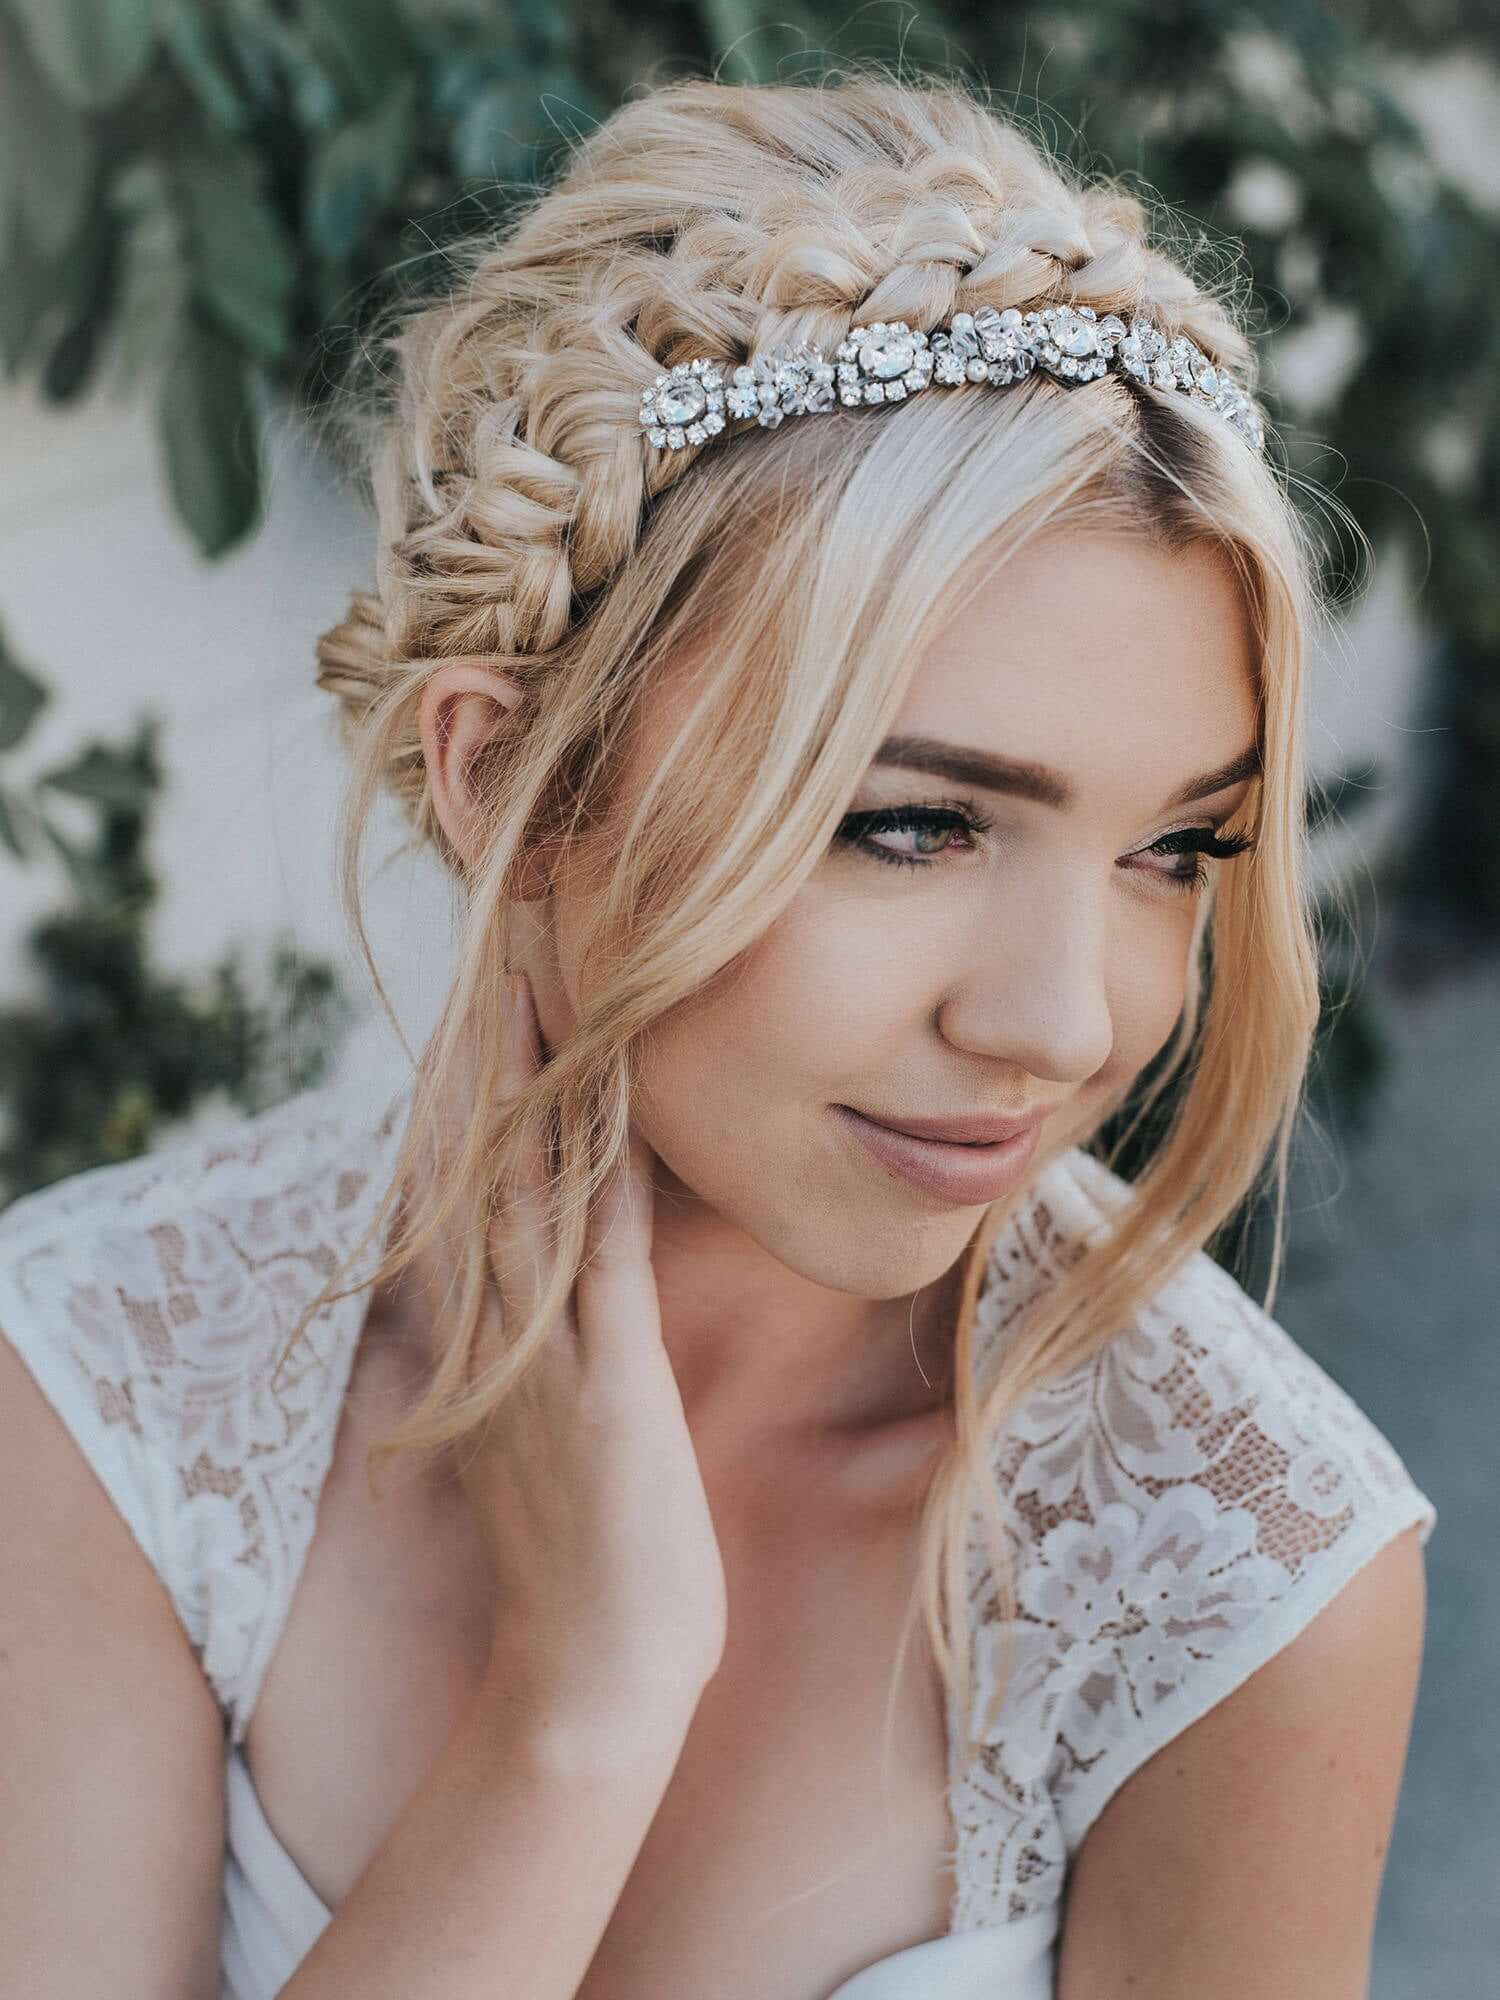 HAIR CIRCLET - BRIDAL LACE HEADBAND FOR BOHO INSPIRED HAIRSTYLES IN WH –  Seegang Berlin